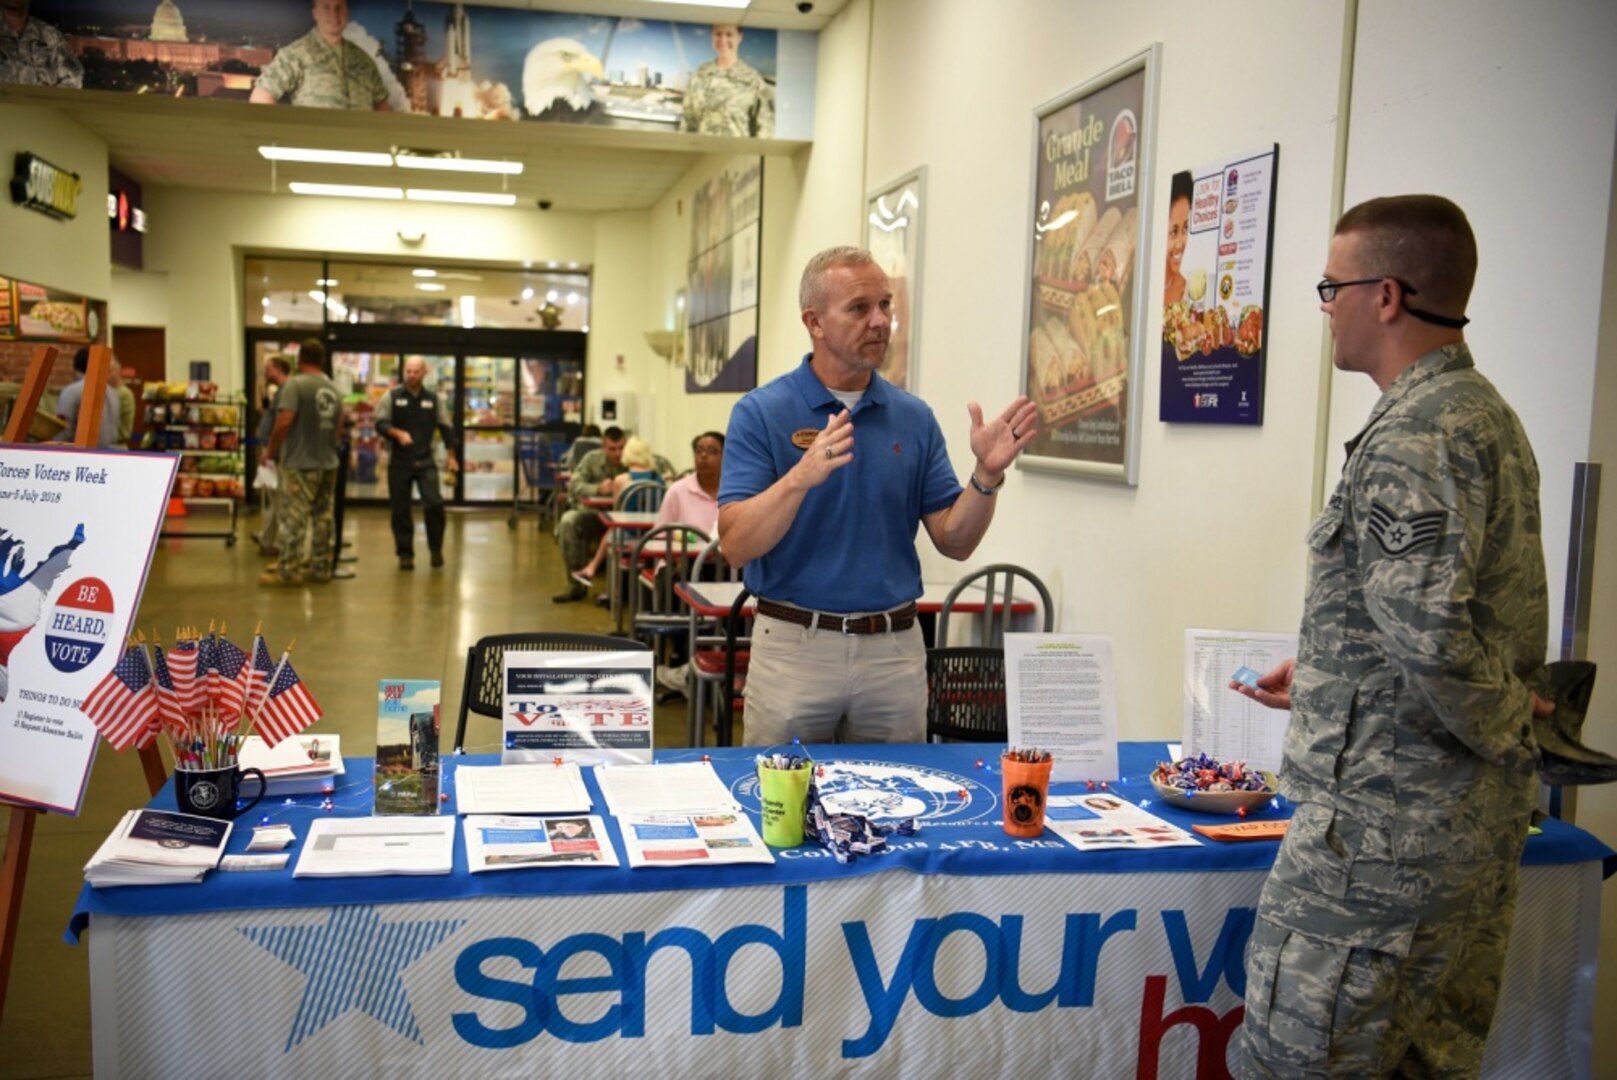 A voting awareness booth is set up at an Air Force base.